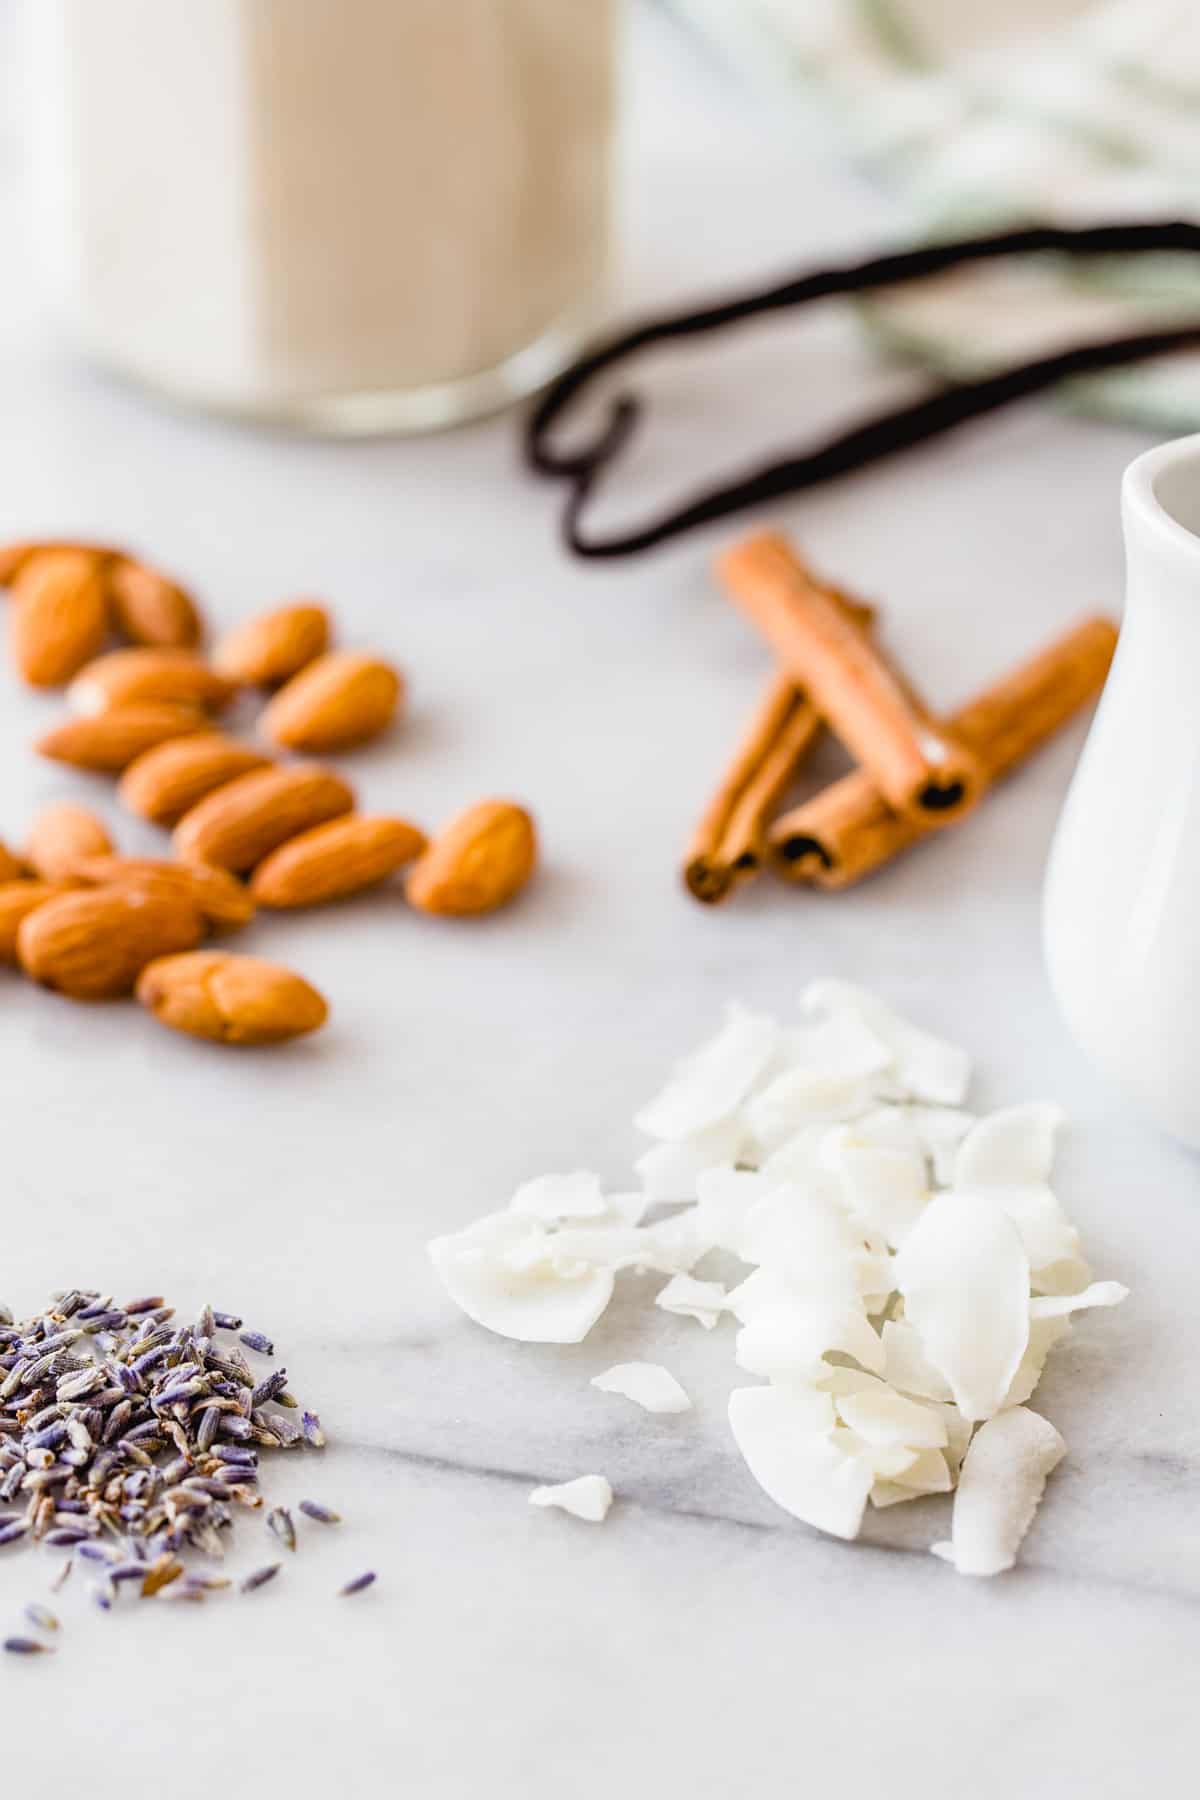 3 Homemade Almond Milk Creamers to Add to Your Next Cup of Coffee